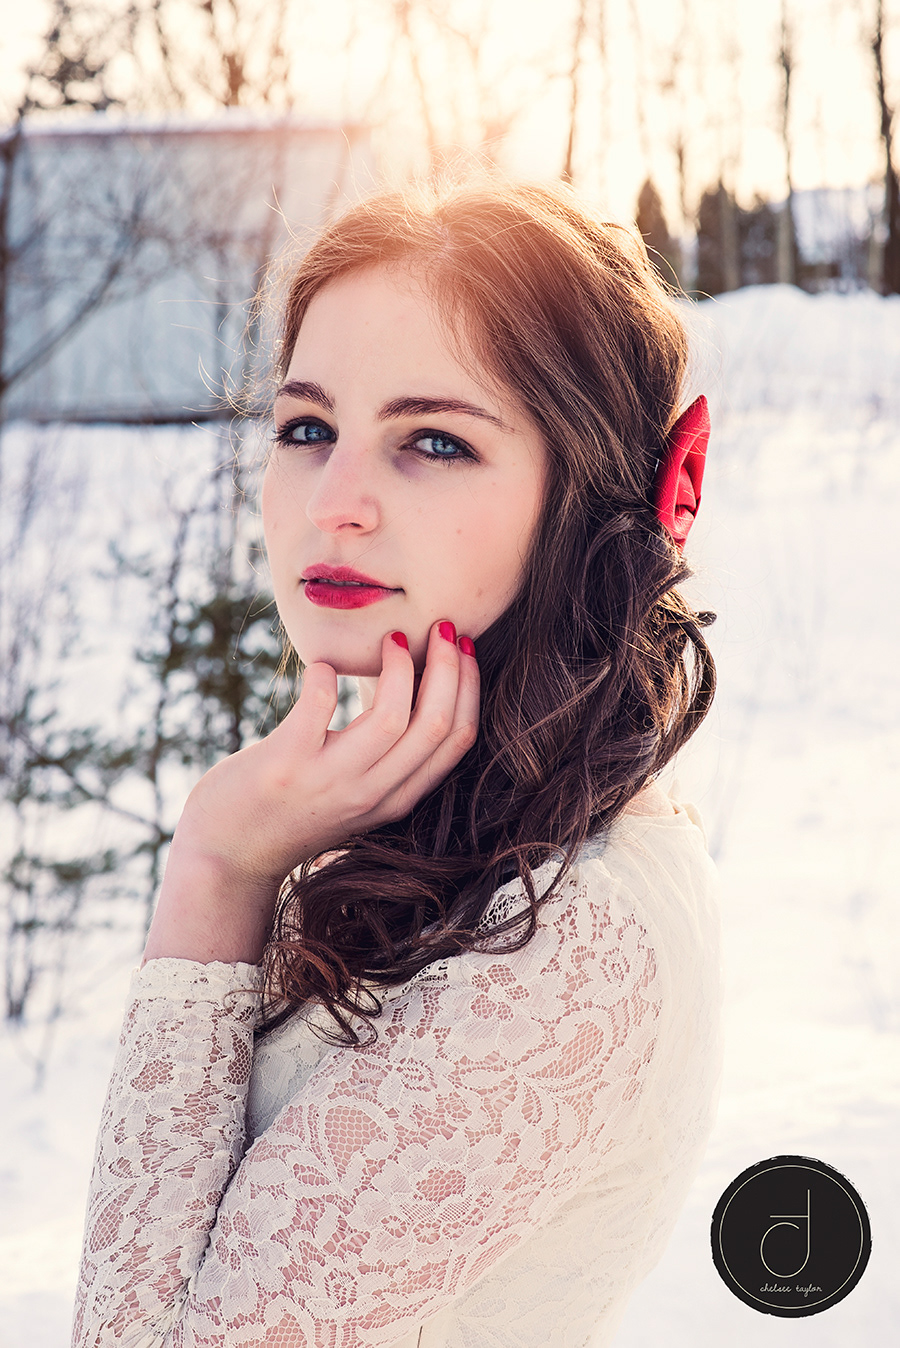 winter snow beauty vintage blue eyes brunette sexy red lips high heels Fur chelsee taylor